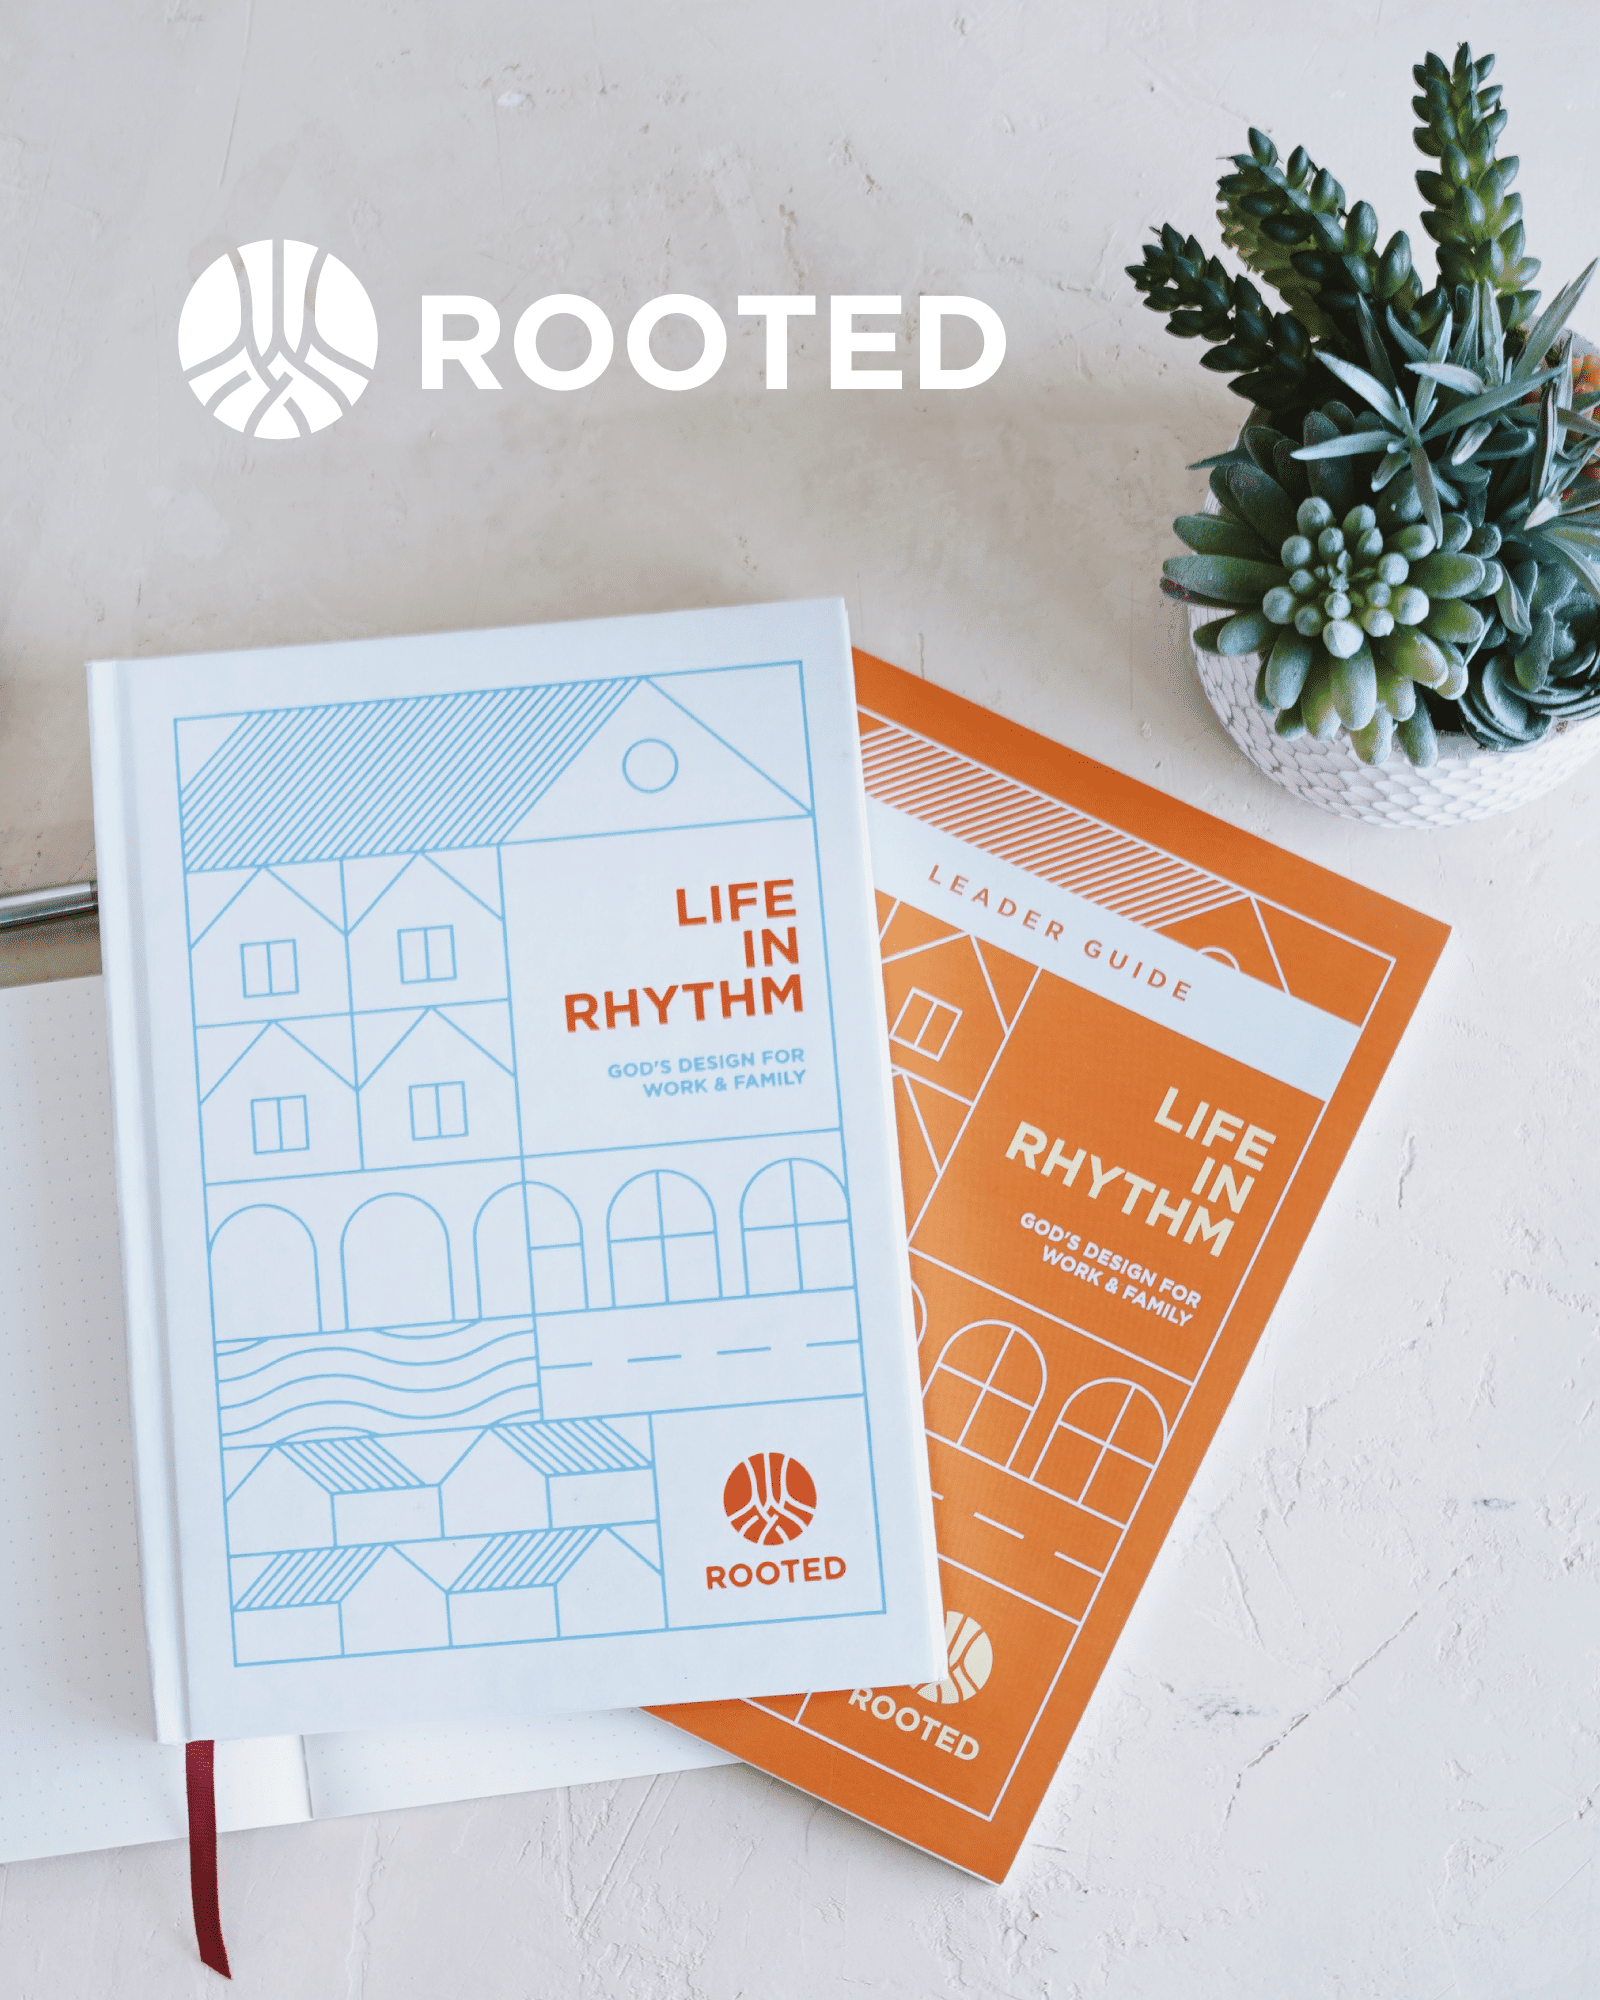 Rooted Network Branding